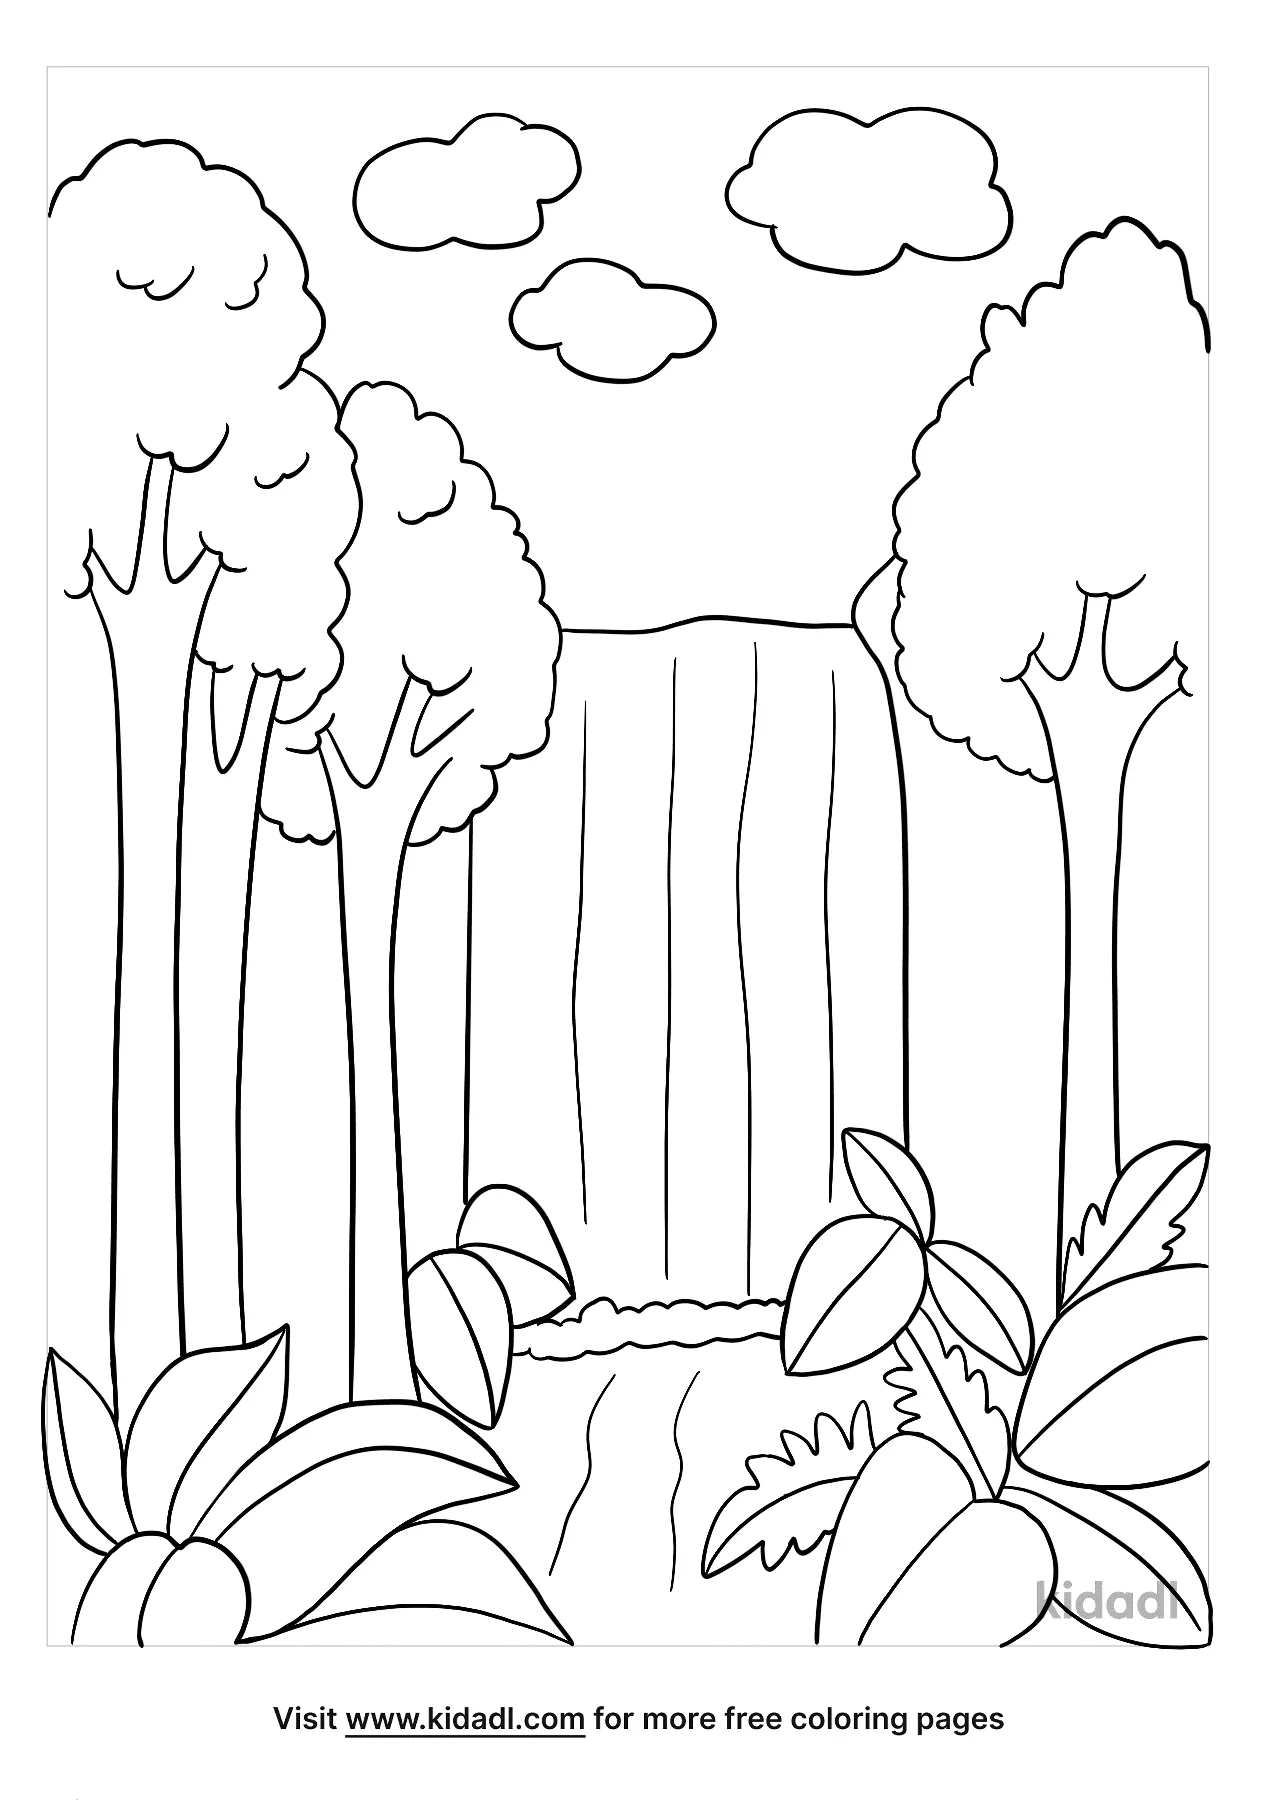 coloring-pages-rain-forest